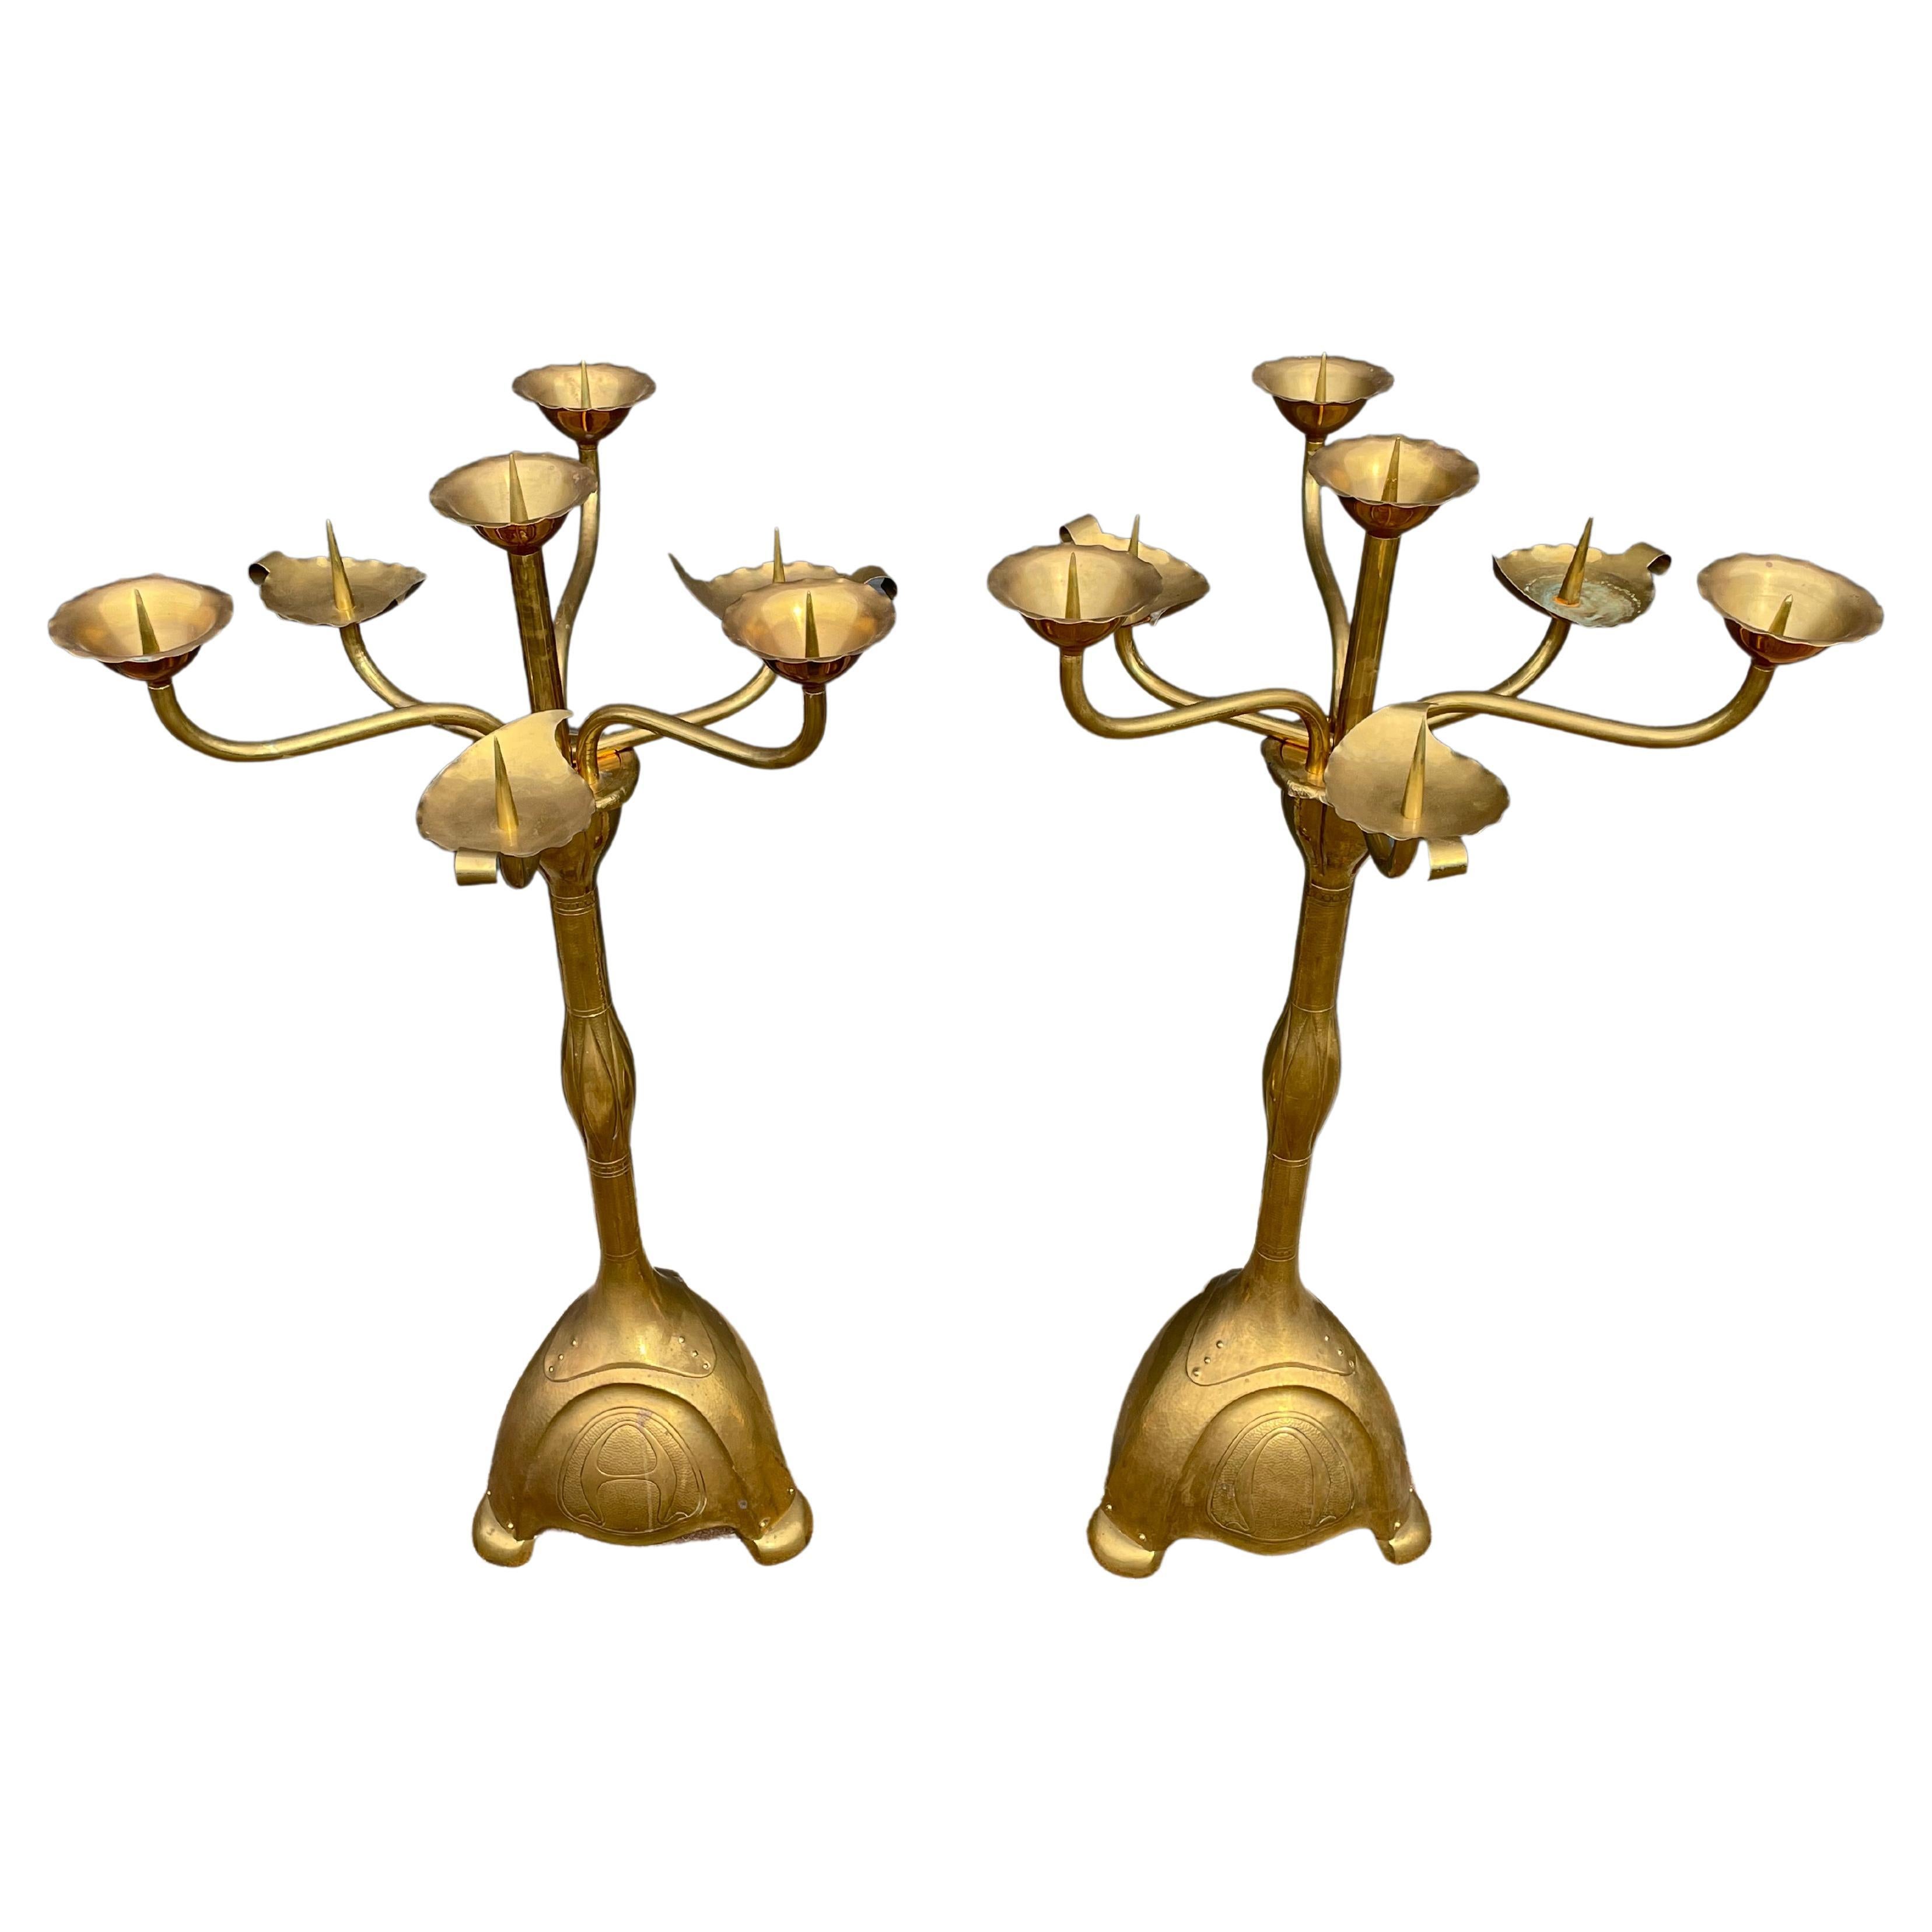 Largest Pair of Arts and Crafts Floor Candle Holders / Alpha & Omega Candelabras